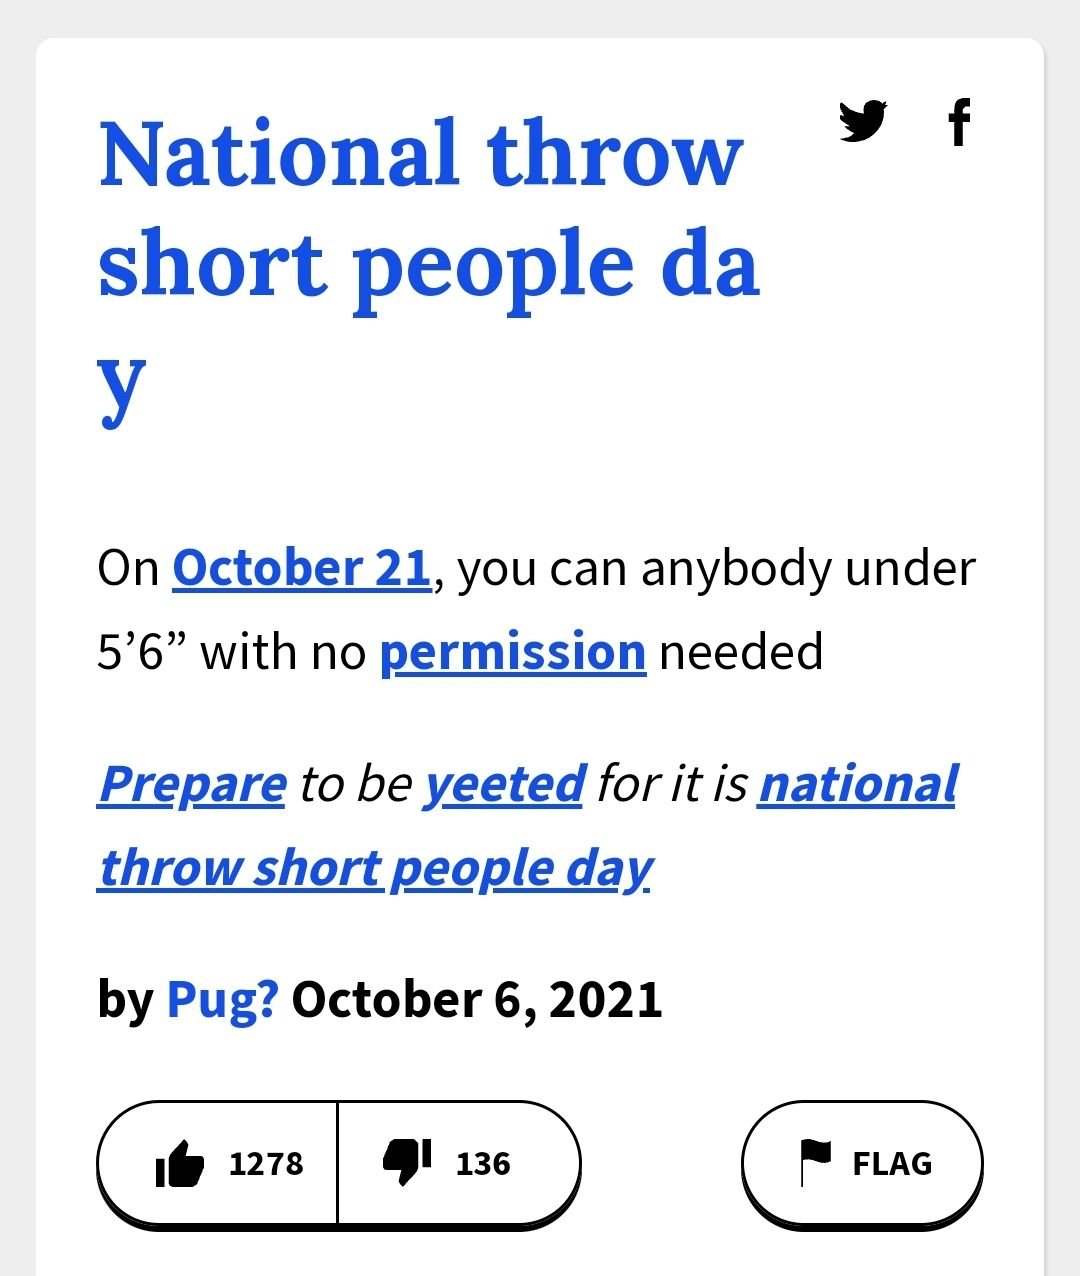 National throw
short people da
y
On October 21, you can anybody under
5'6" with no permission needed
Prepare to be yeeted for it is national
throw short people day.
by Pug? October 6, 2021
1278
136
FLAG